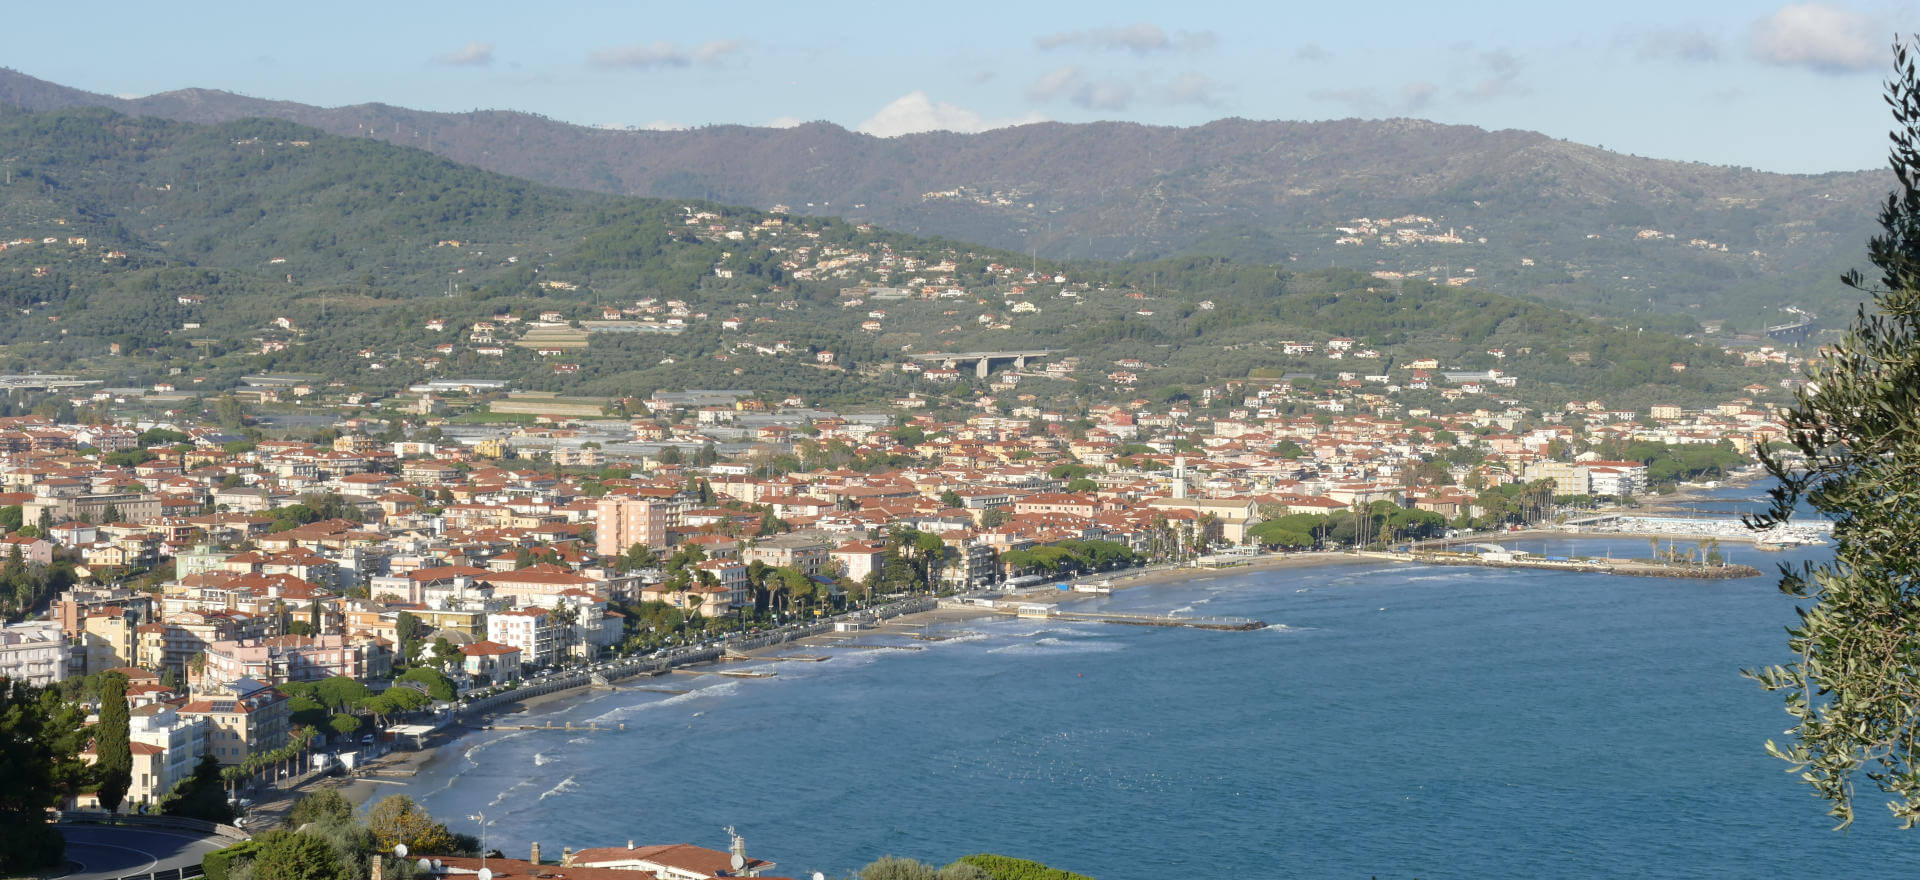 The town of Diano Marina between past and present